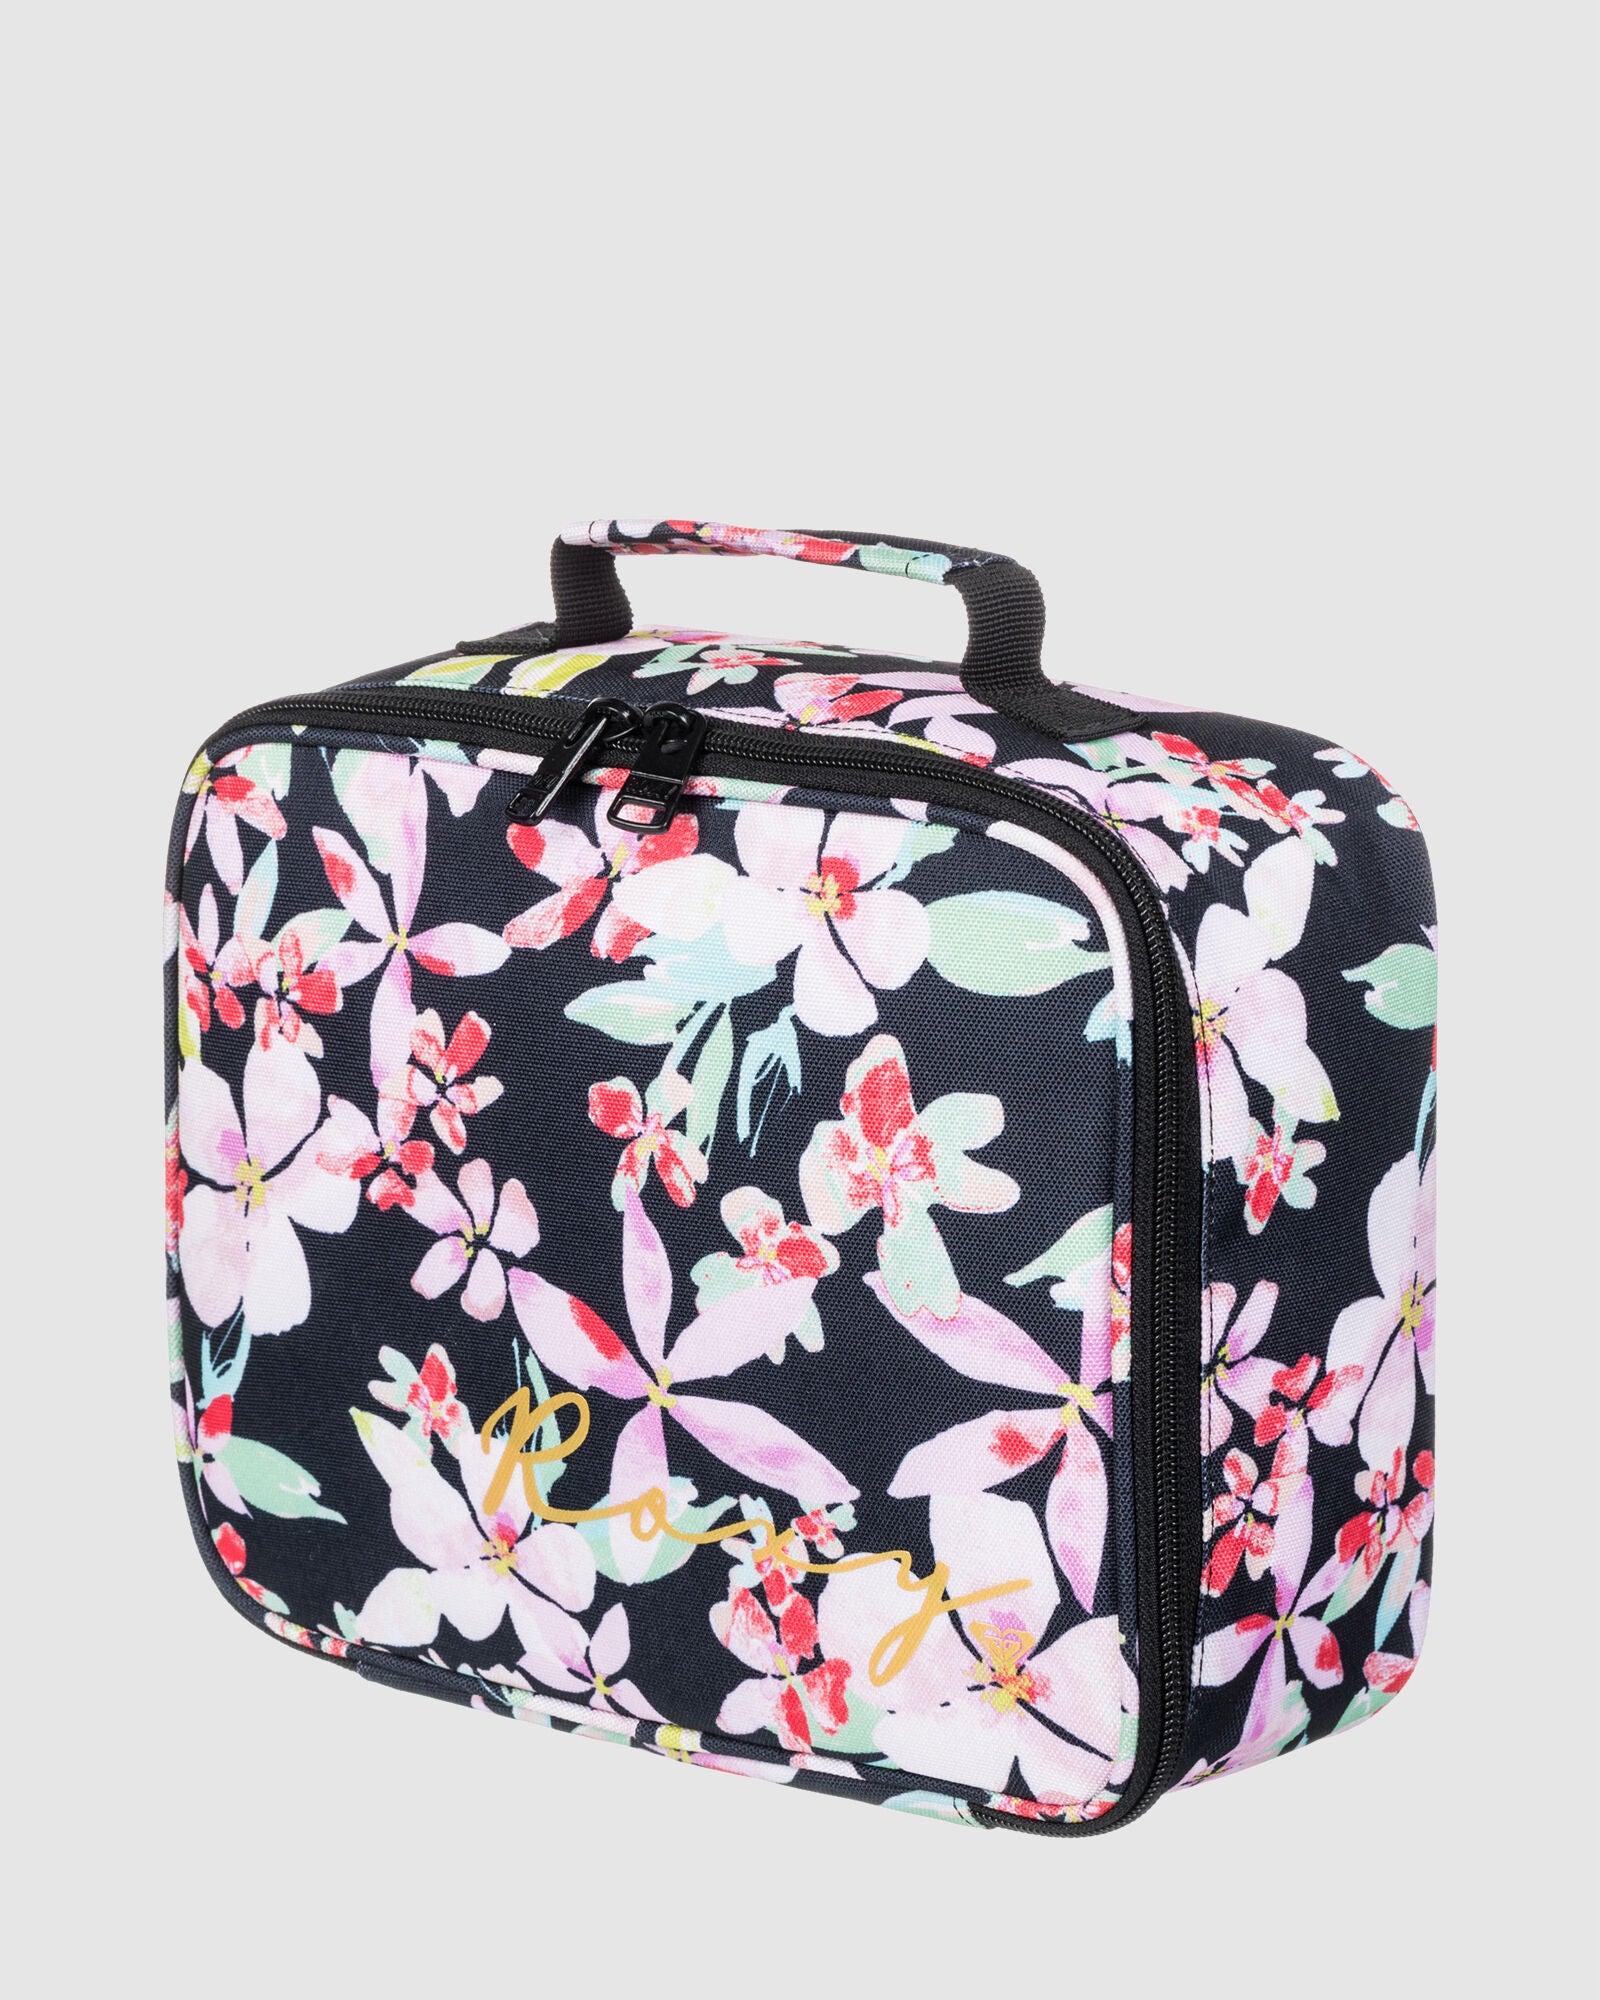 100% Recycled Polyester groove in life lunch box roxy floral cooler bag